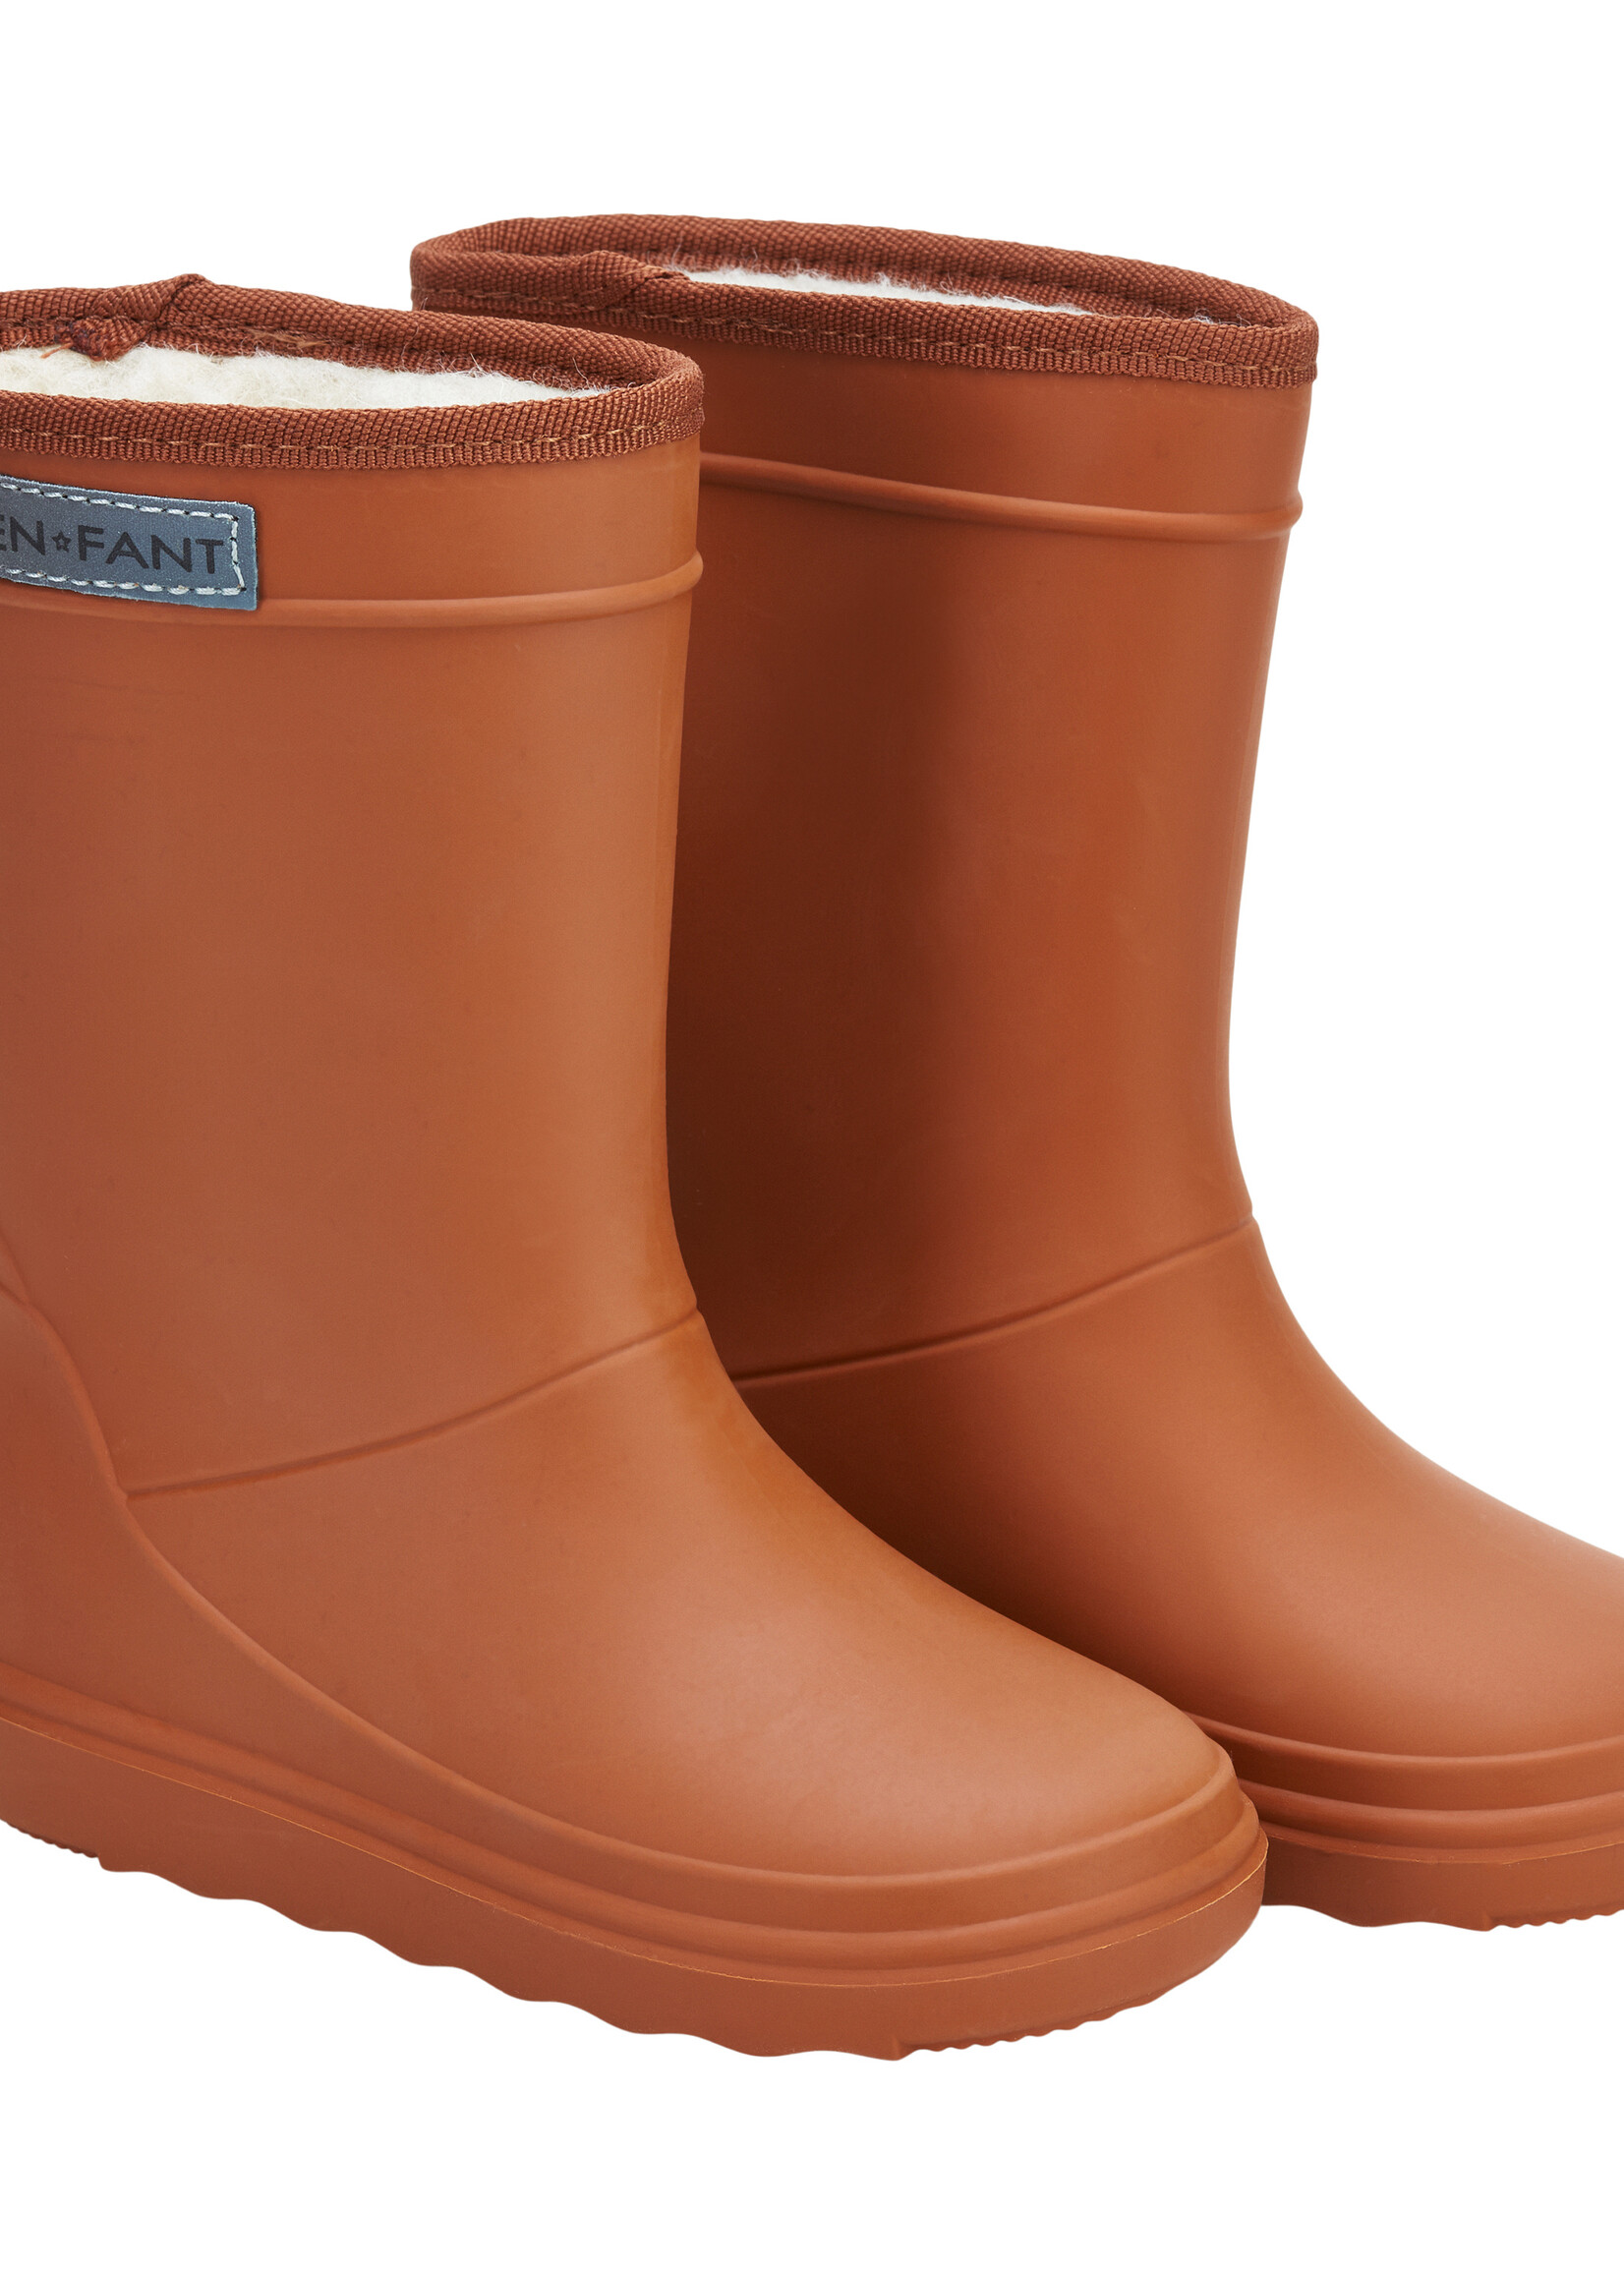 ENFANT Thermo Boots, Leather Brown, W23